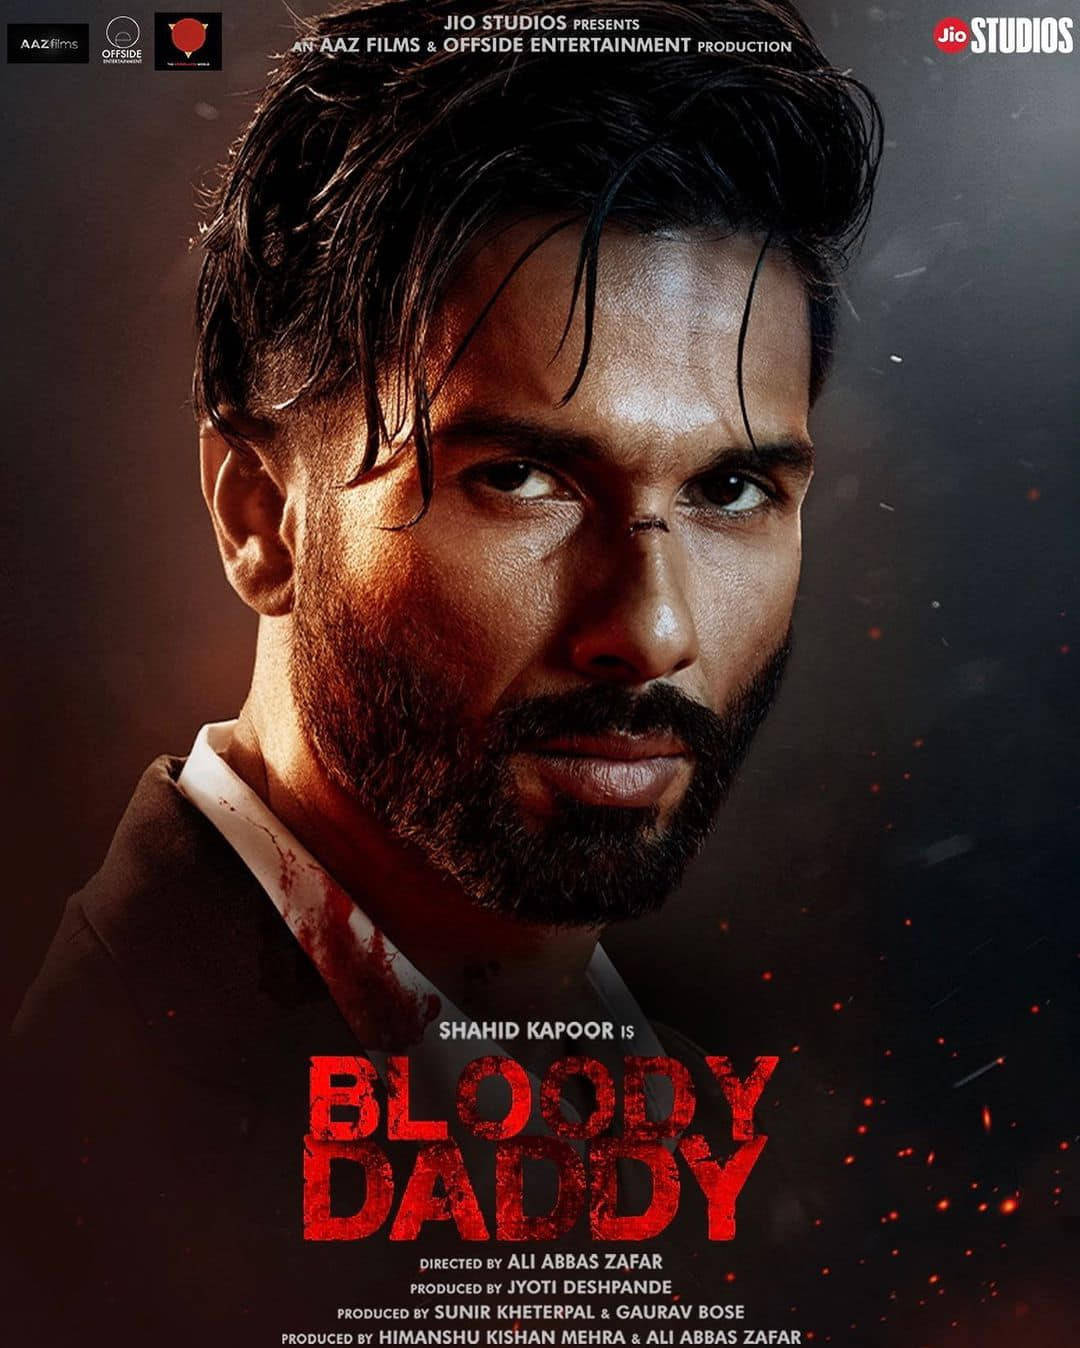 Shahid Kapoor drops the intense first poster of Bloody Daddy ...